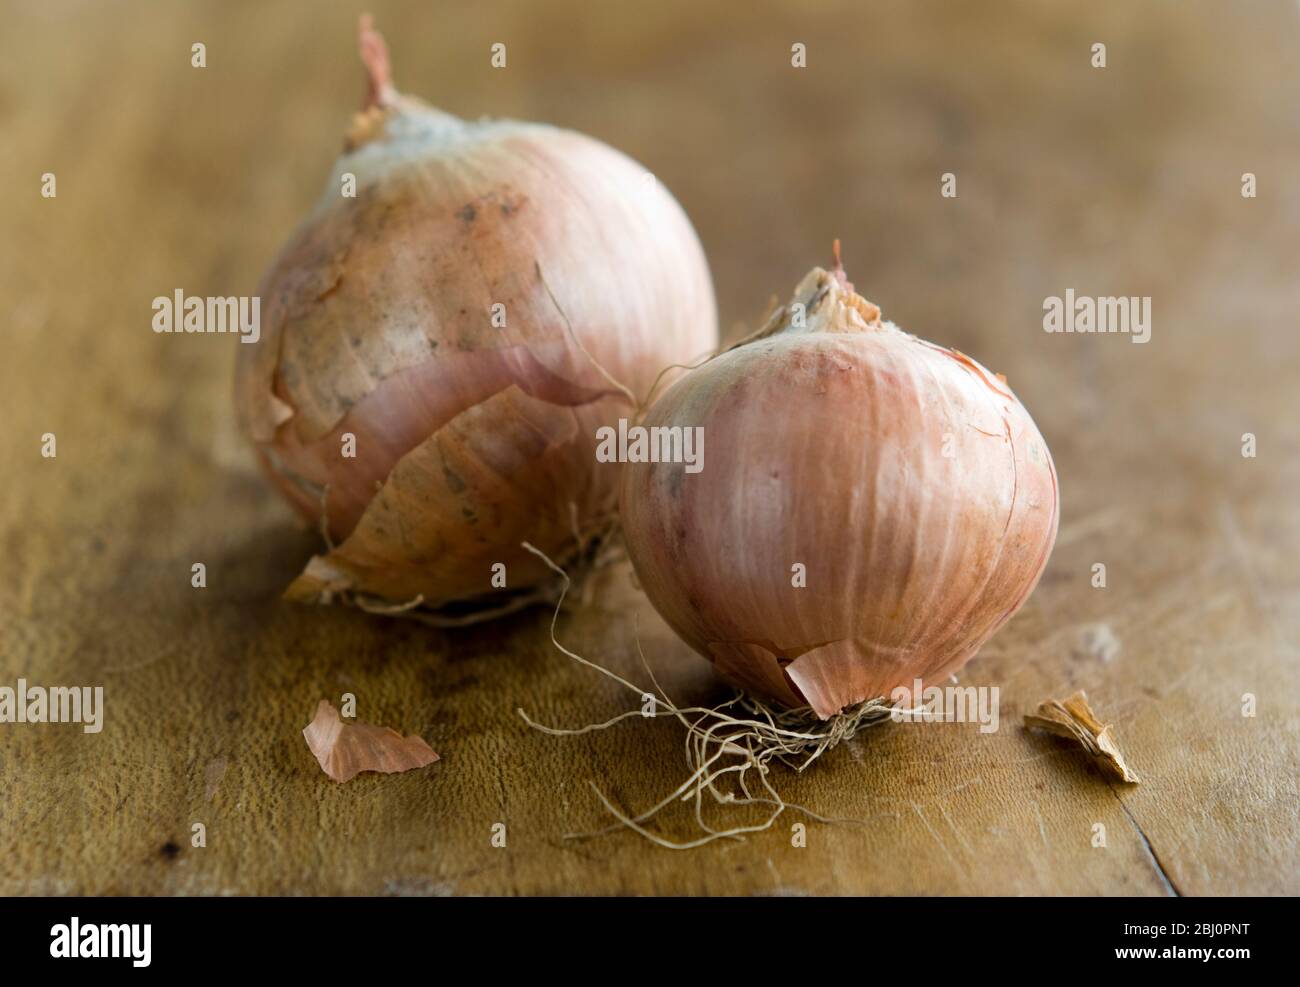 Two whole small onions unpeeled on wooden board - Stock Photo